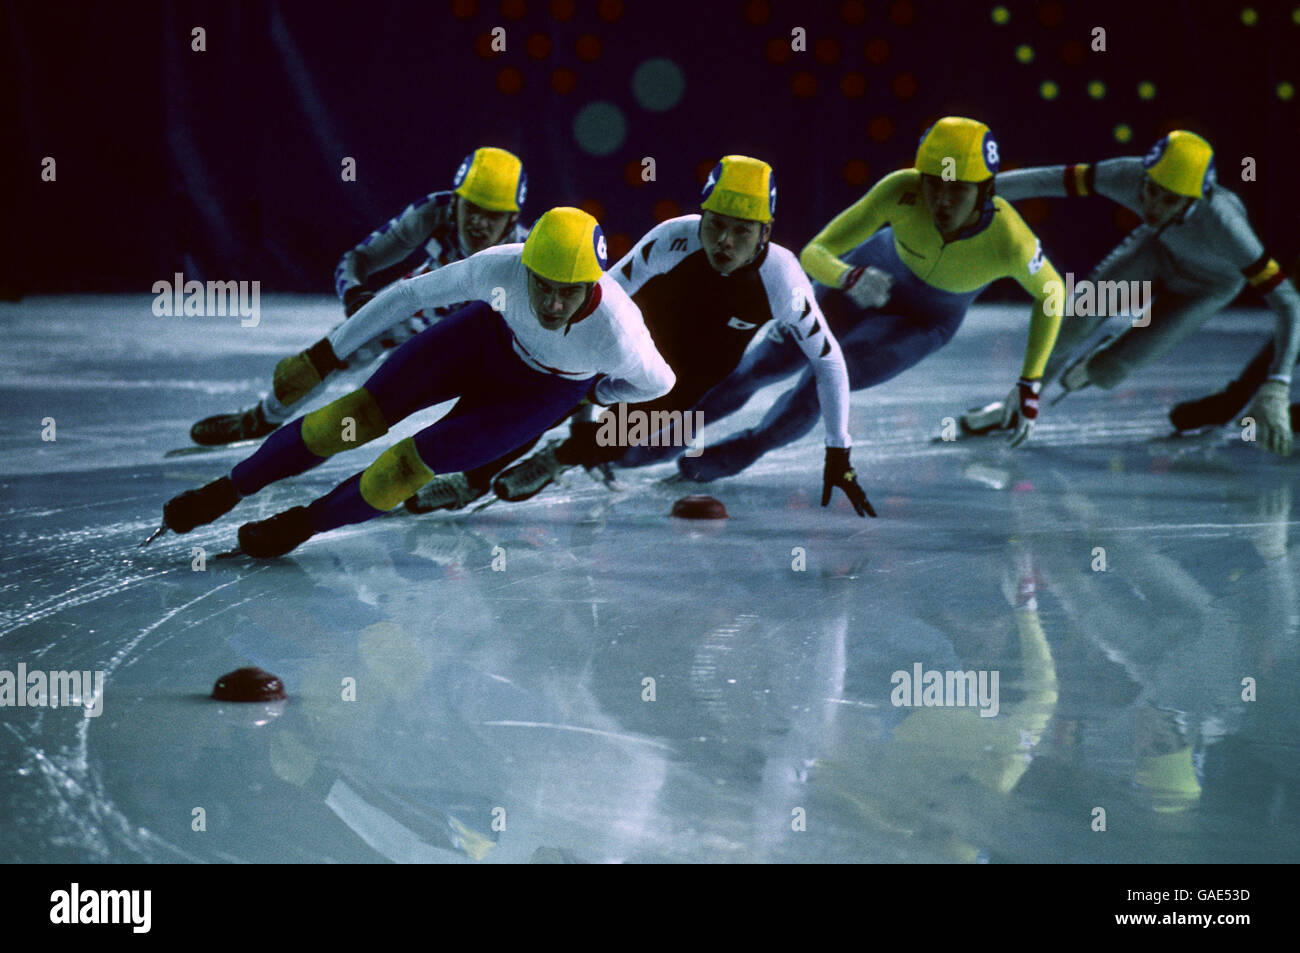 Winter Olympic Games 1988 - Calgary. Great Britain's Wilf O'Reilly leads during the Short Track Speed Skating. Stock Photo